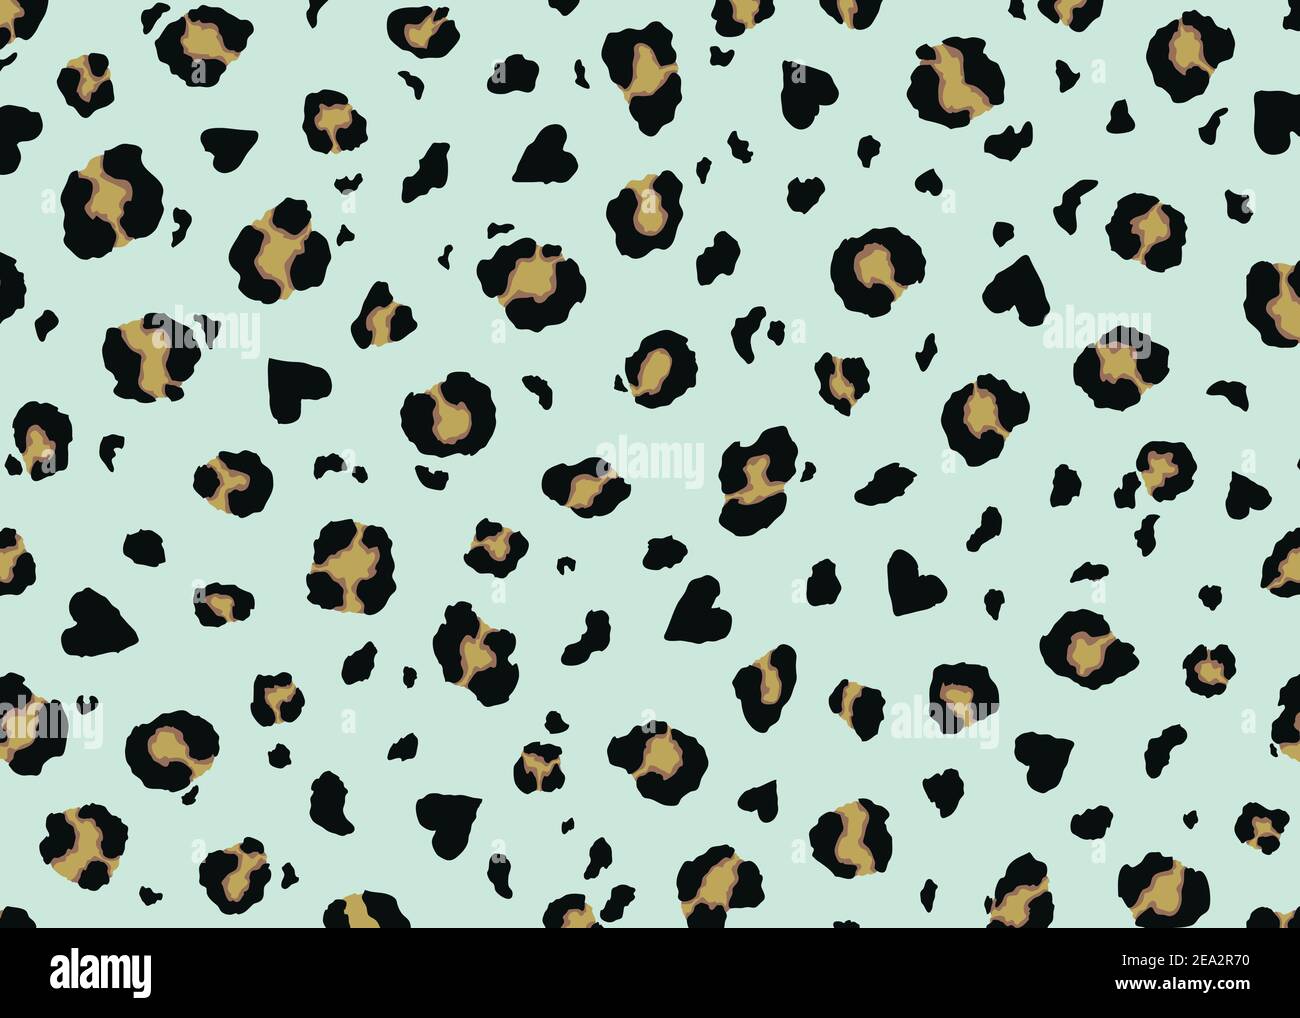 Leopard skin pattern design with abstract heart shapes. Vector illustration background. Wildlife fur skin design illustration. Stock Vector